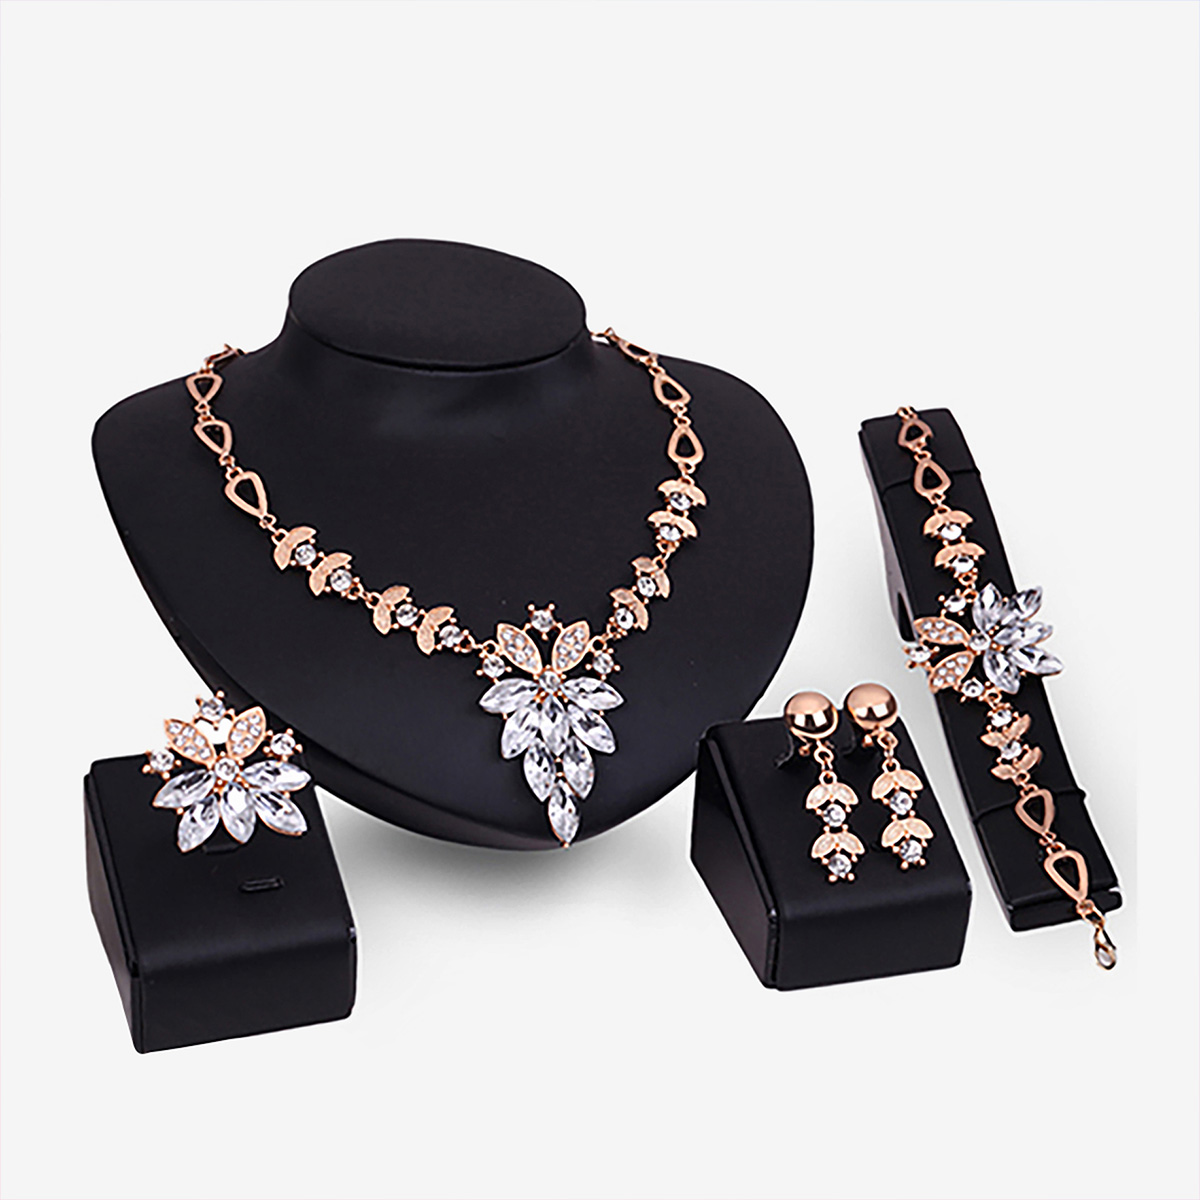 4Pcs Jewelry Set Flower Design Birthday Gift Durable Necklace Earrings Bracelet Ring Jewelry Set for Wedding